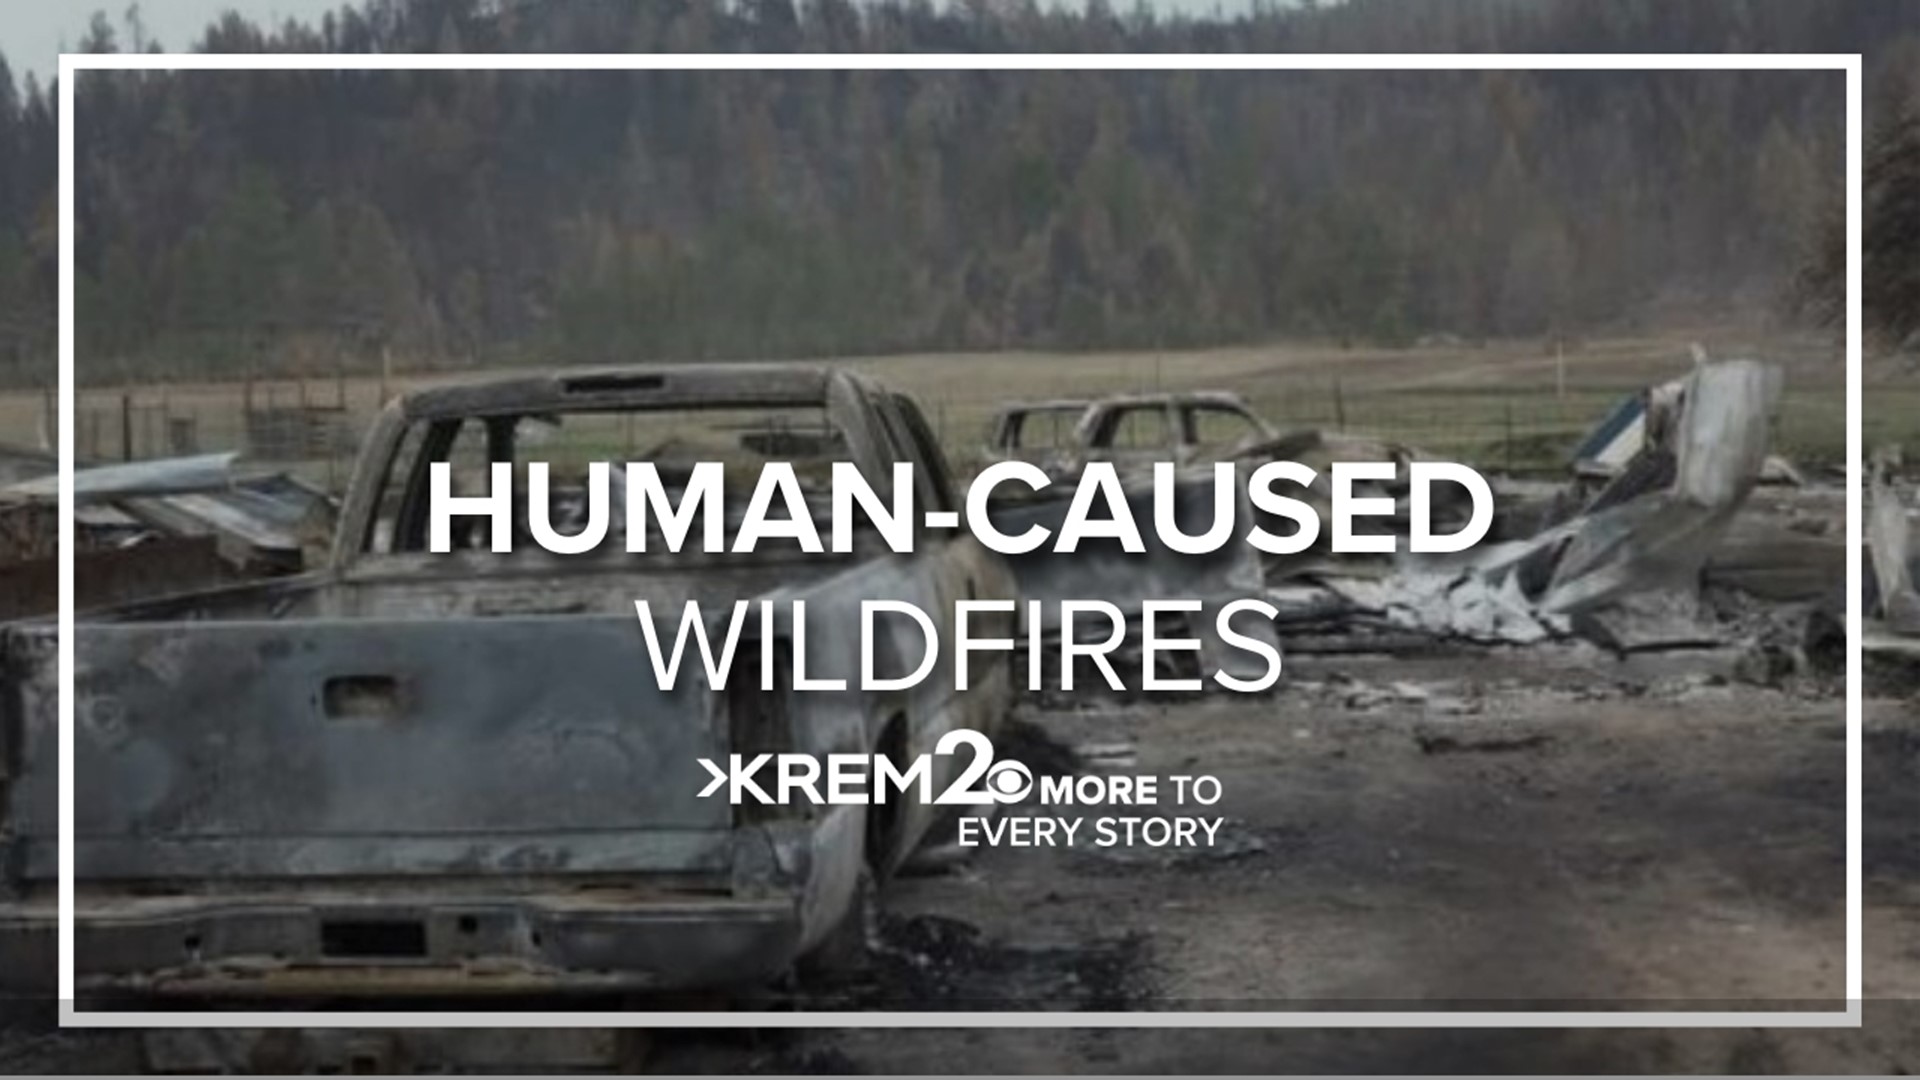 90% of fires in Washington were human-caused. Of the 90%, 50% are negligently or intentionally started.